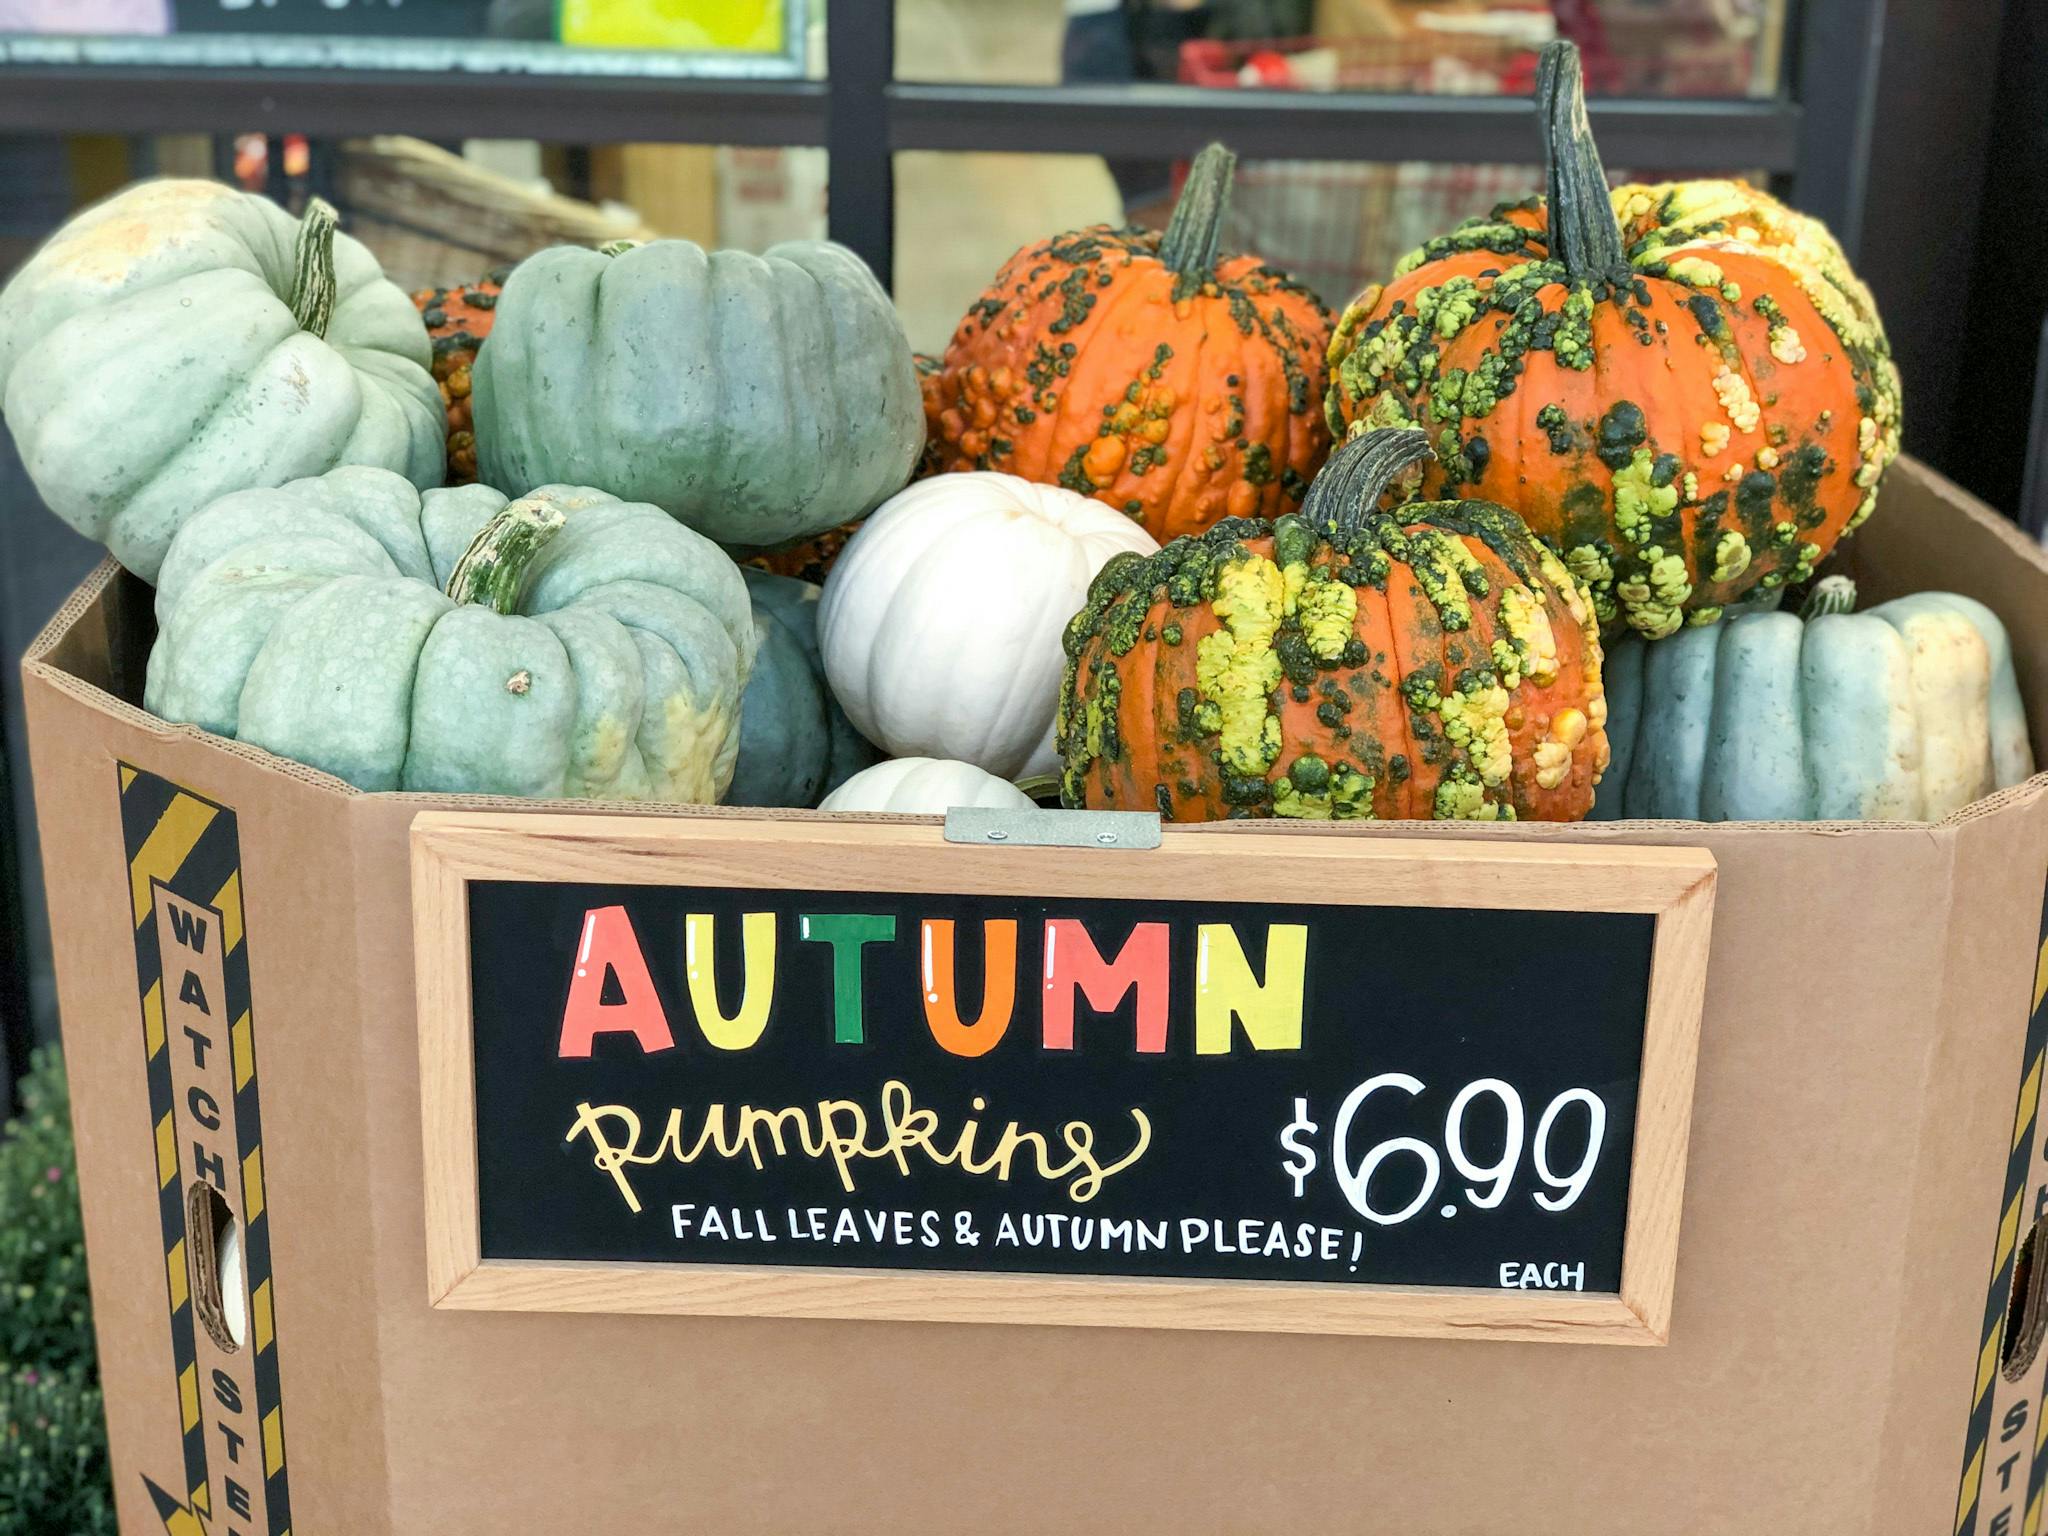 Trader Joe's pumpkins in a box outside the store.